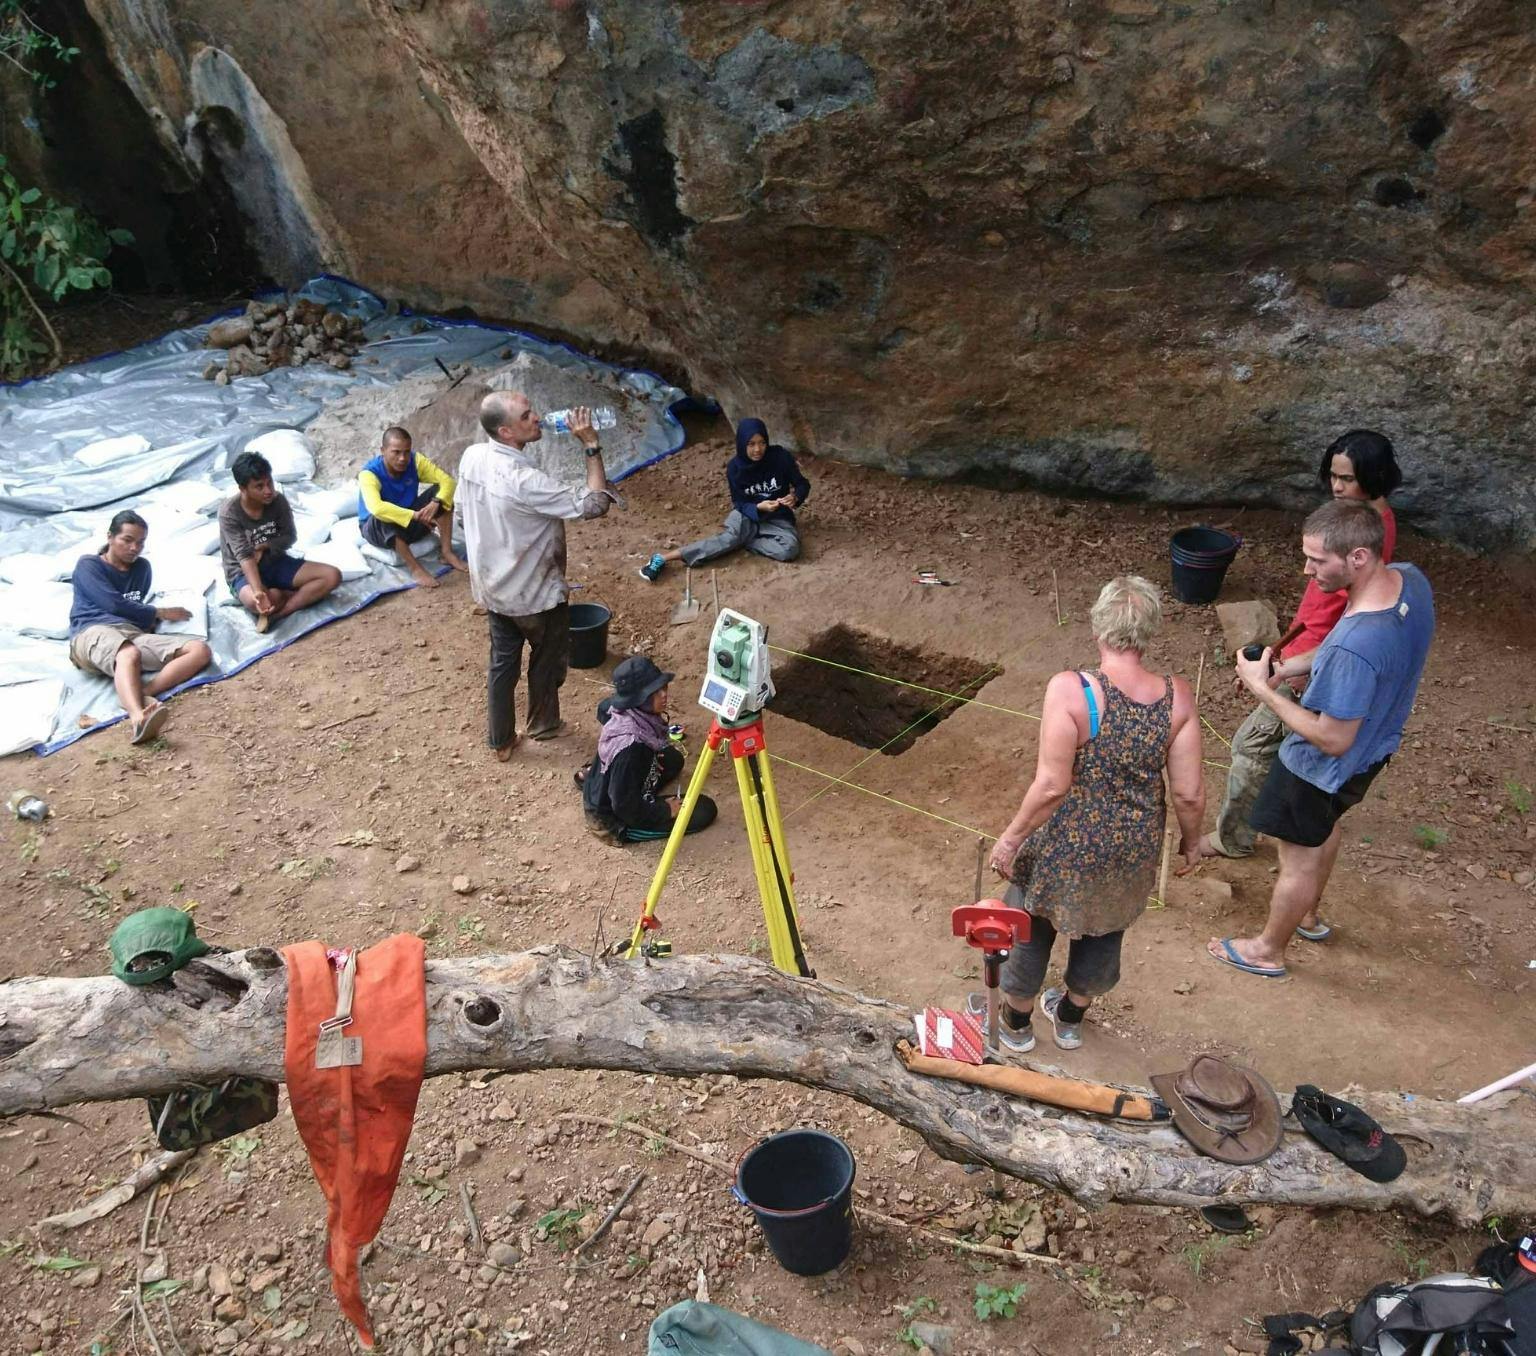 excavation site. four people are standing around a square hole cut into the brown earth. Three people are sitting on a large silver sheet of plastic. There is a large brown rock face in the background and leaves. Various excavation equipment is laying around the site